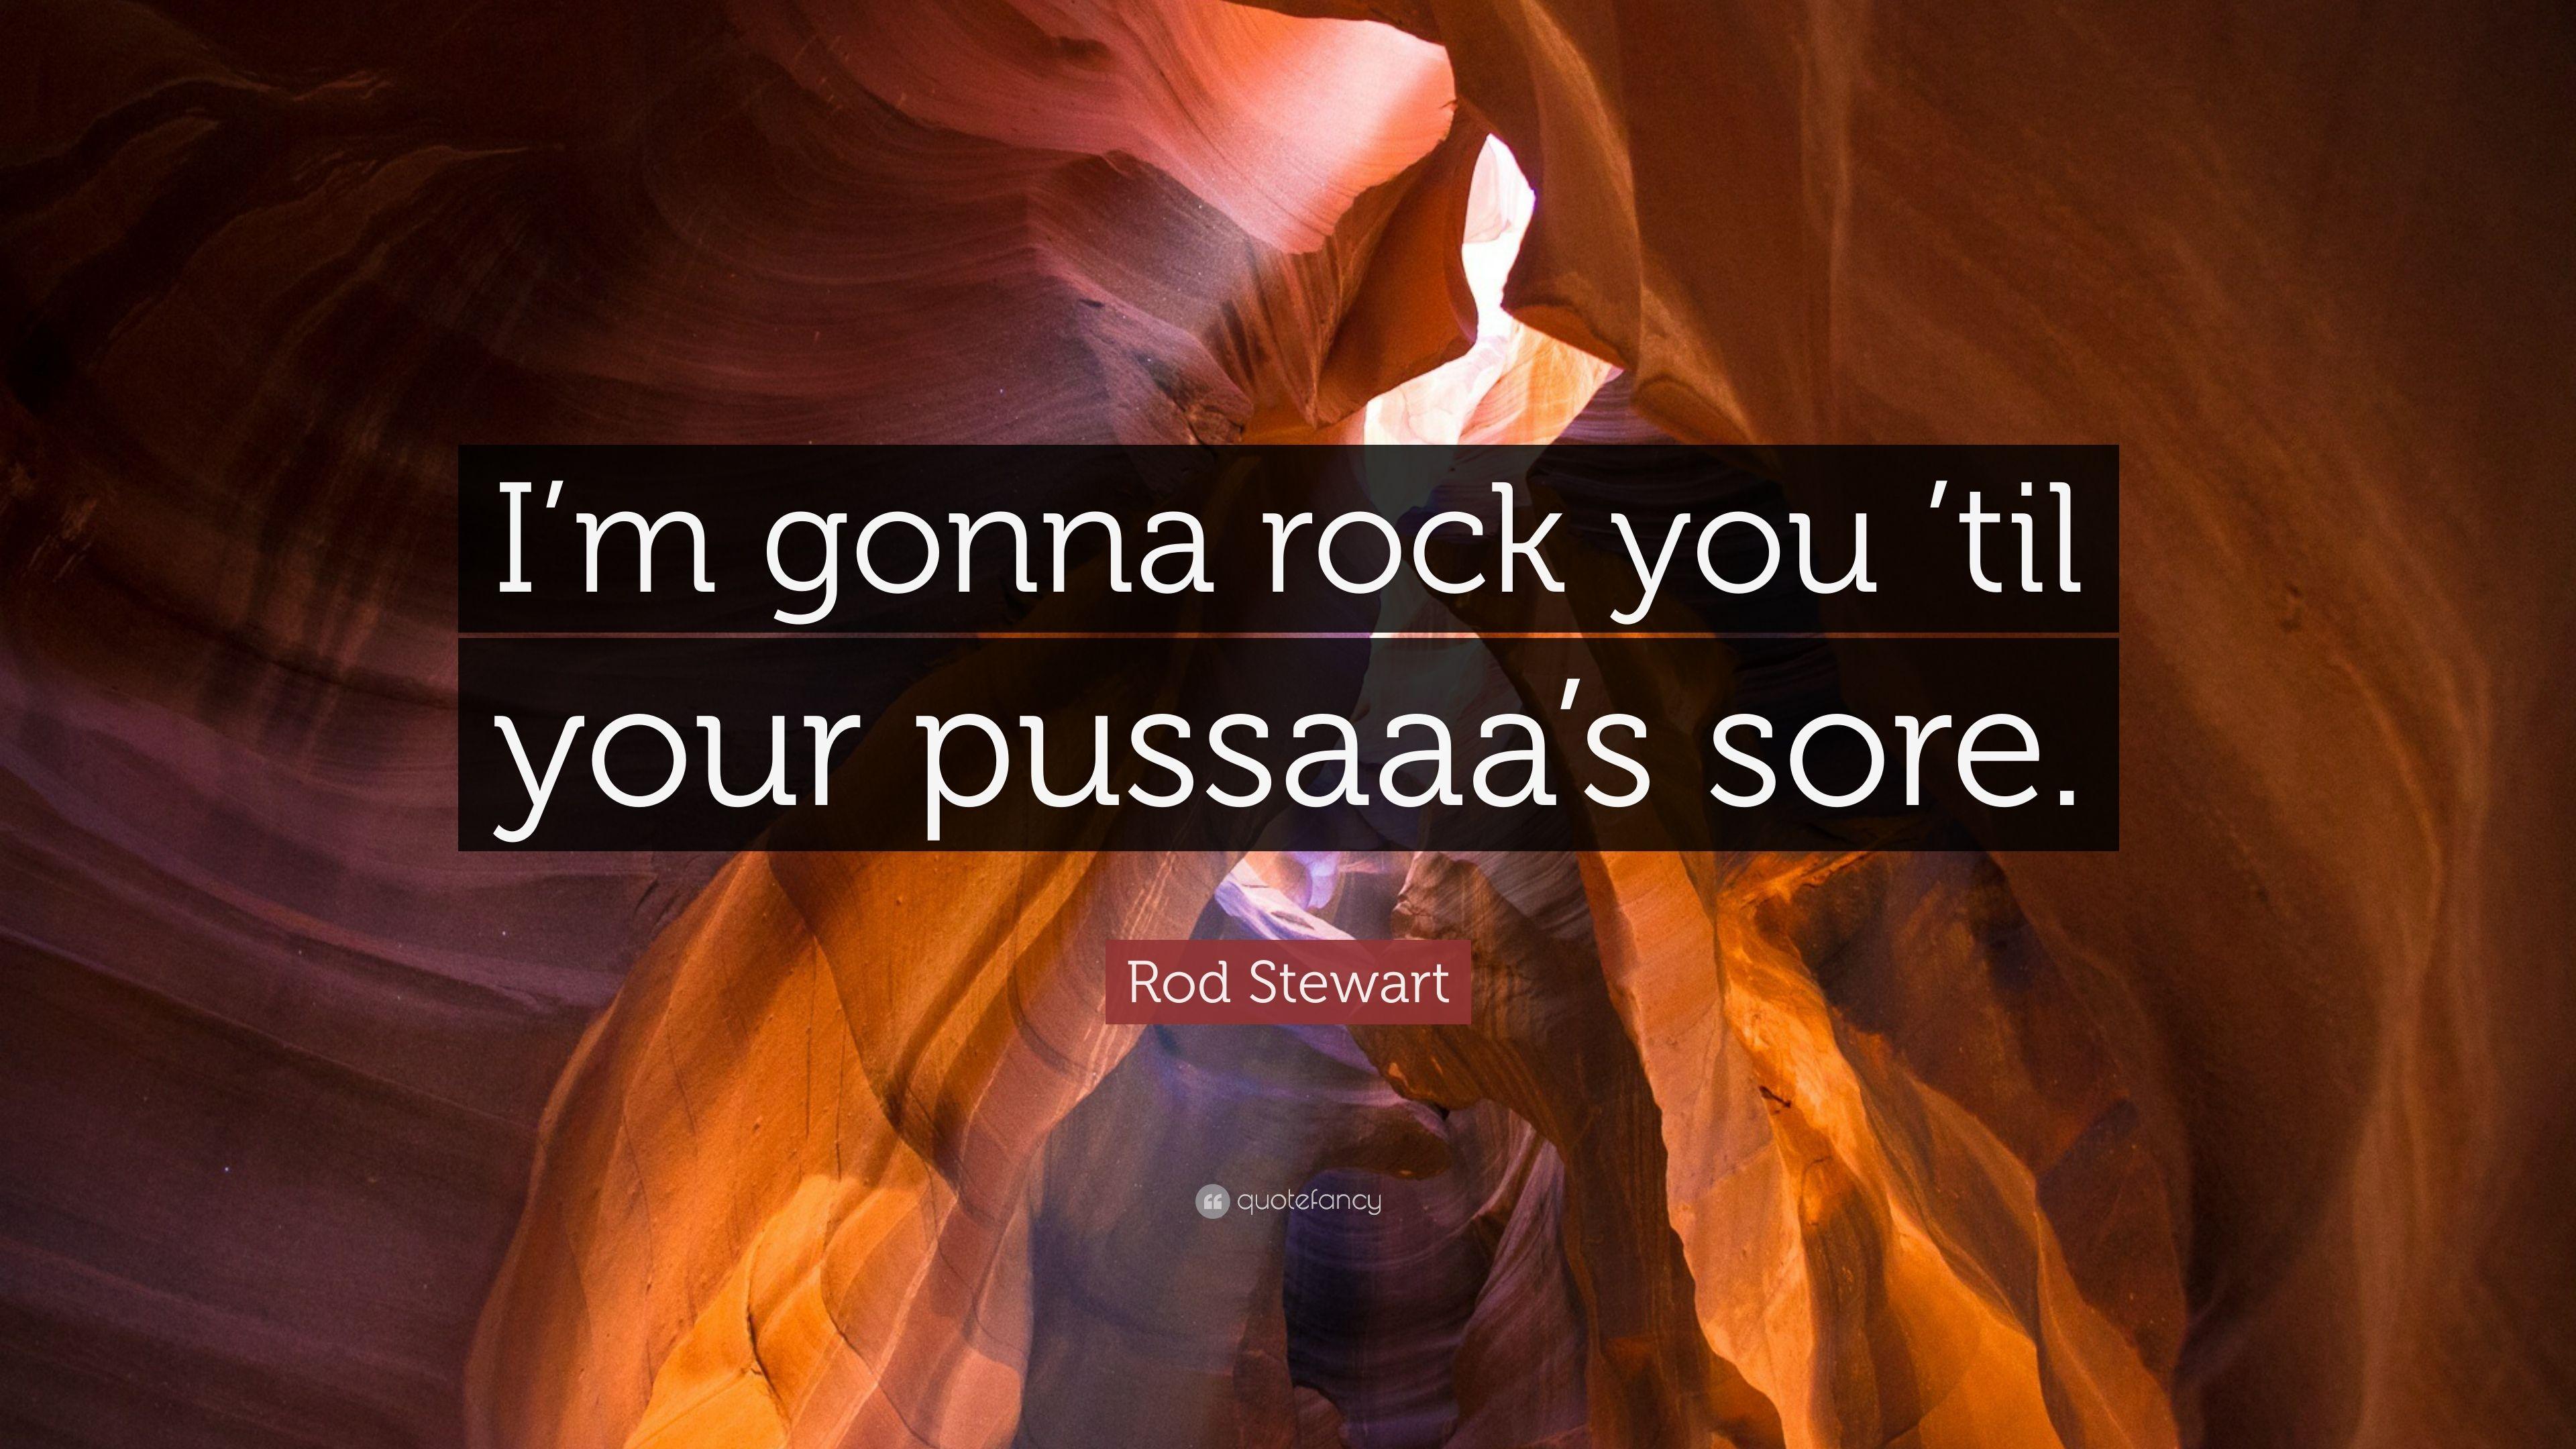 Rod Stewart Quote: “I'm gonna rock you 'til your pussaaa's sore